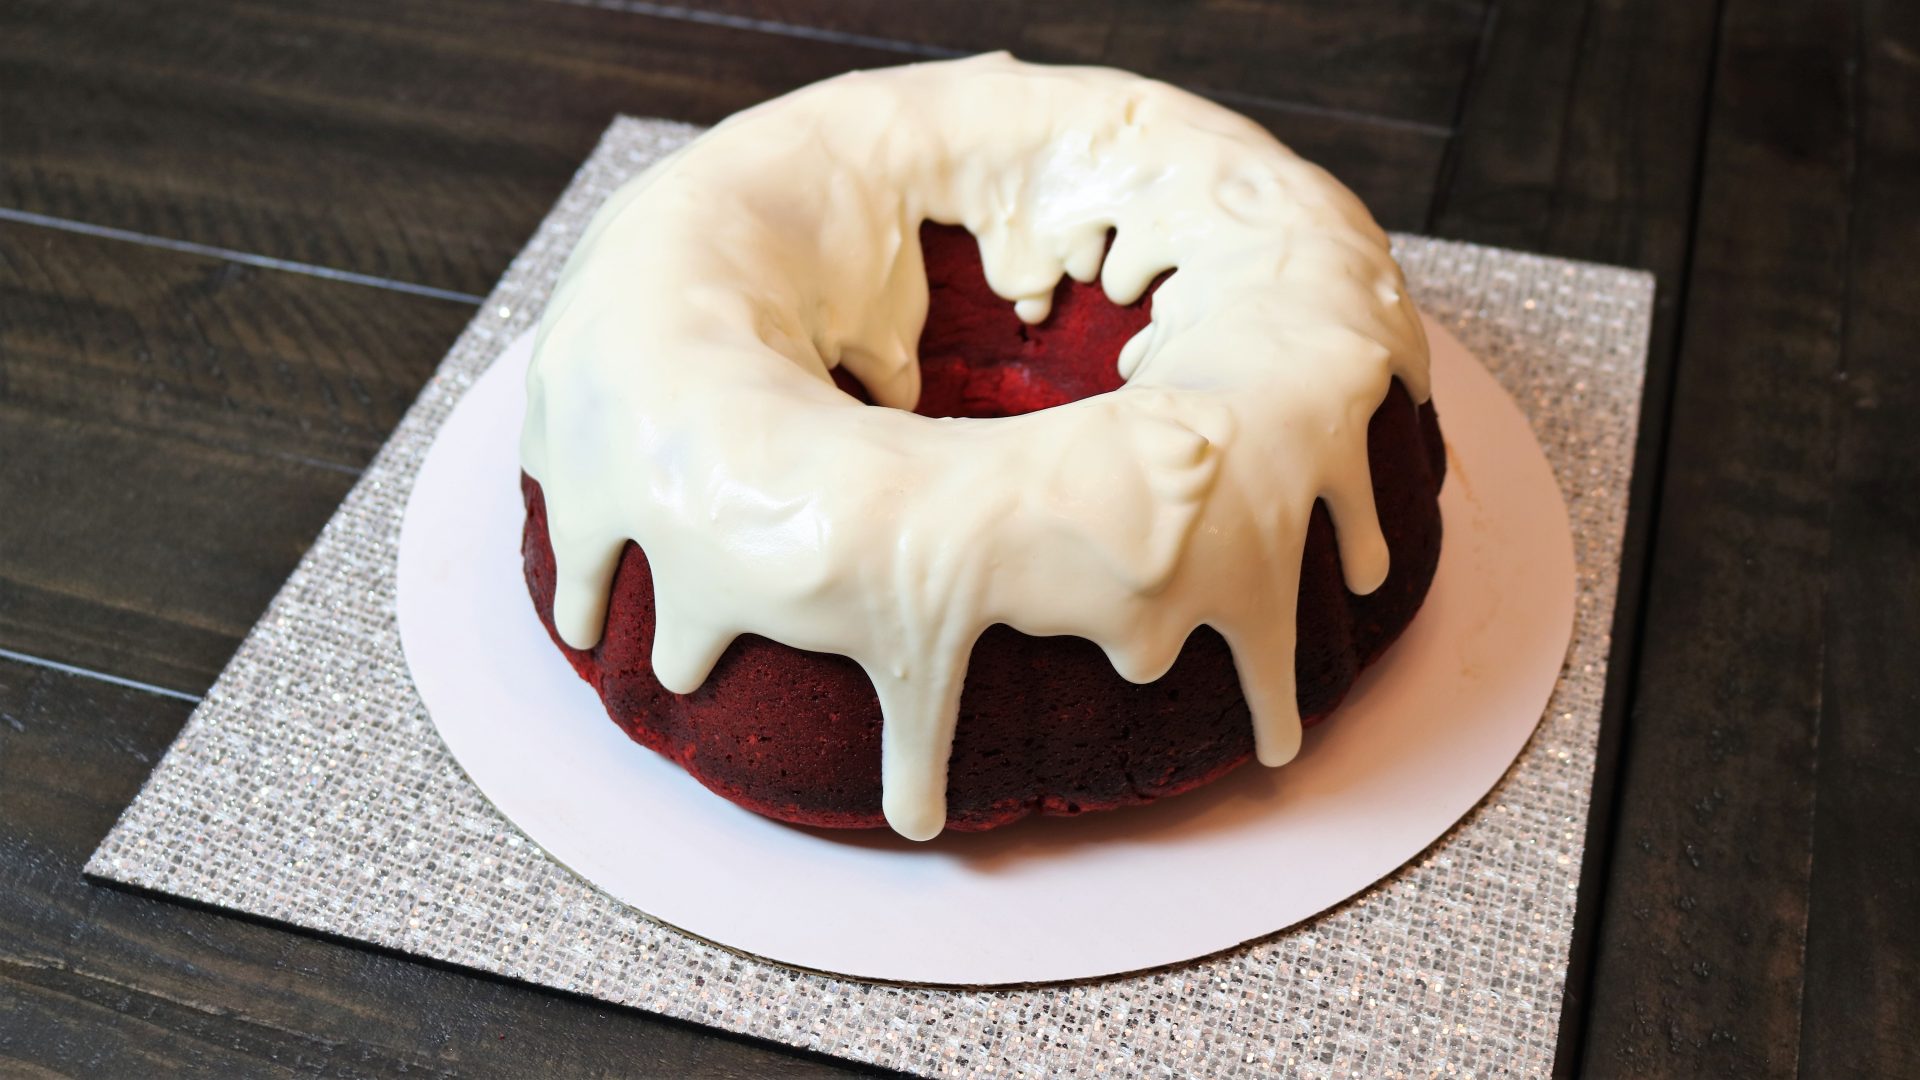 A red velvet cake with white frosting on top.